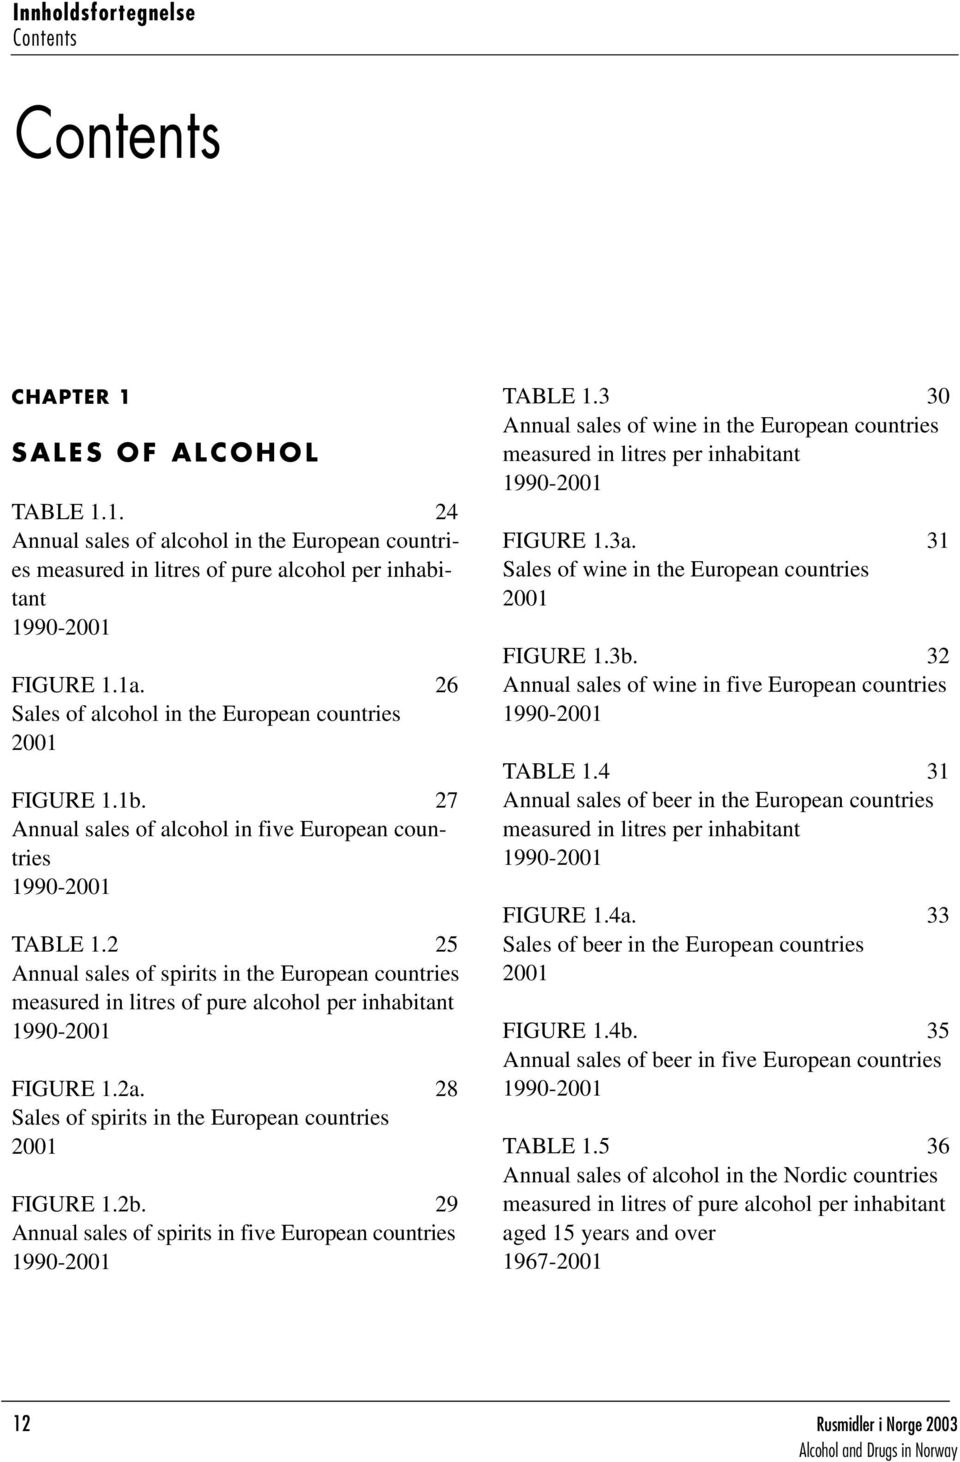 2 25 Annual sales of spirits in the European countries measured in litres of pure alcohol per inhabitant 1990-2001 FIGURE 1.2a. 28 Sales of spirits in the European countries 2001 FIGURE 1.2b.